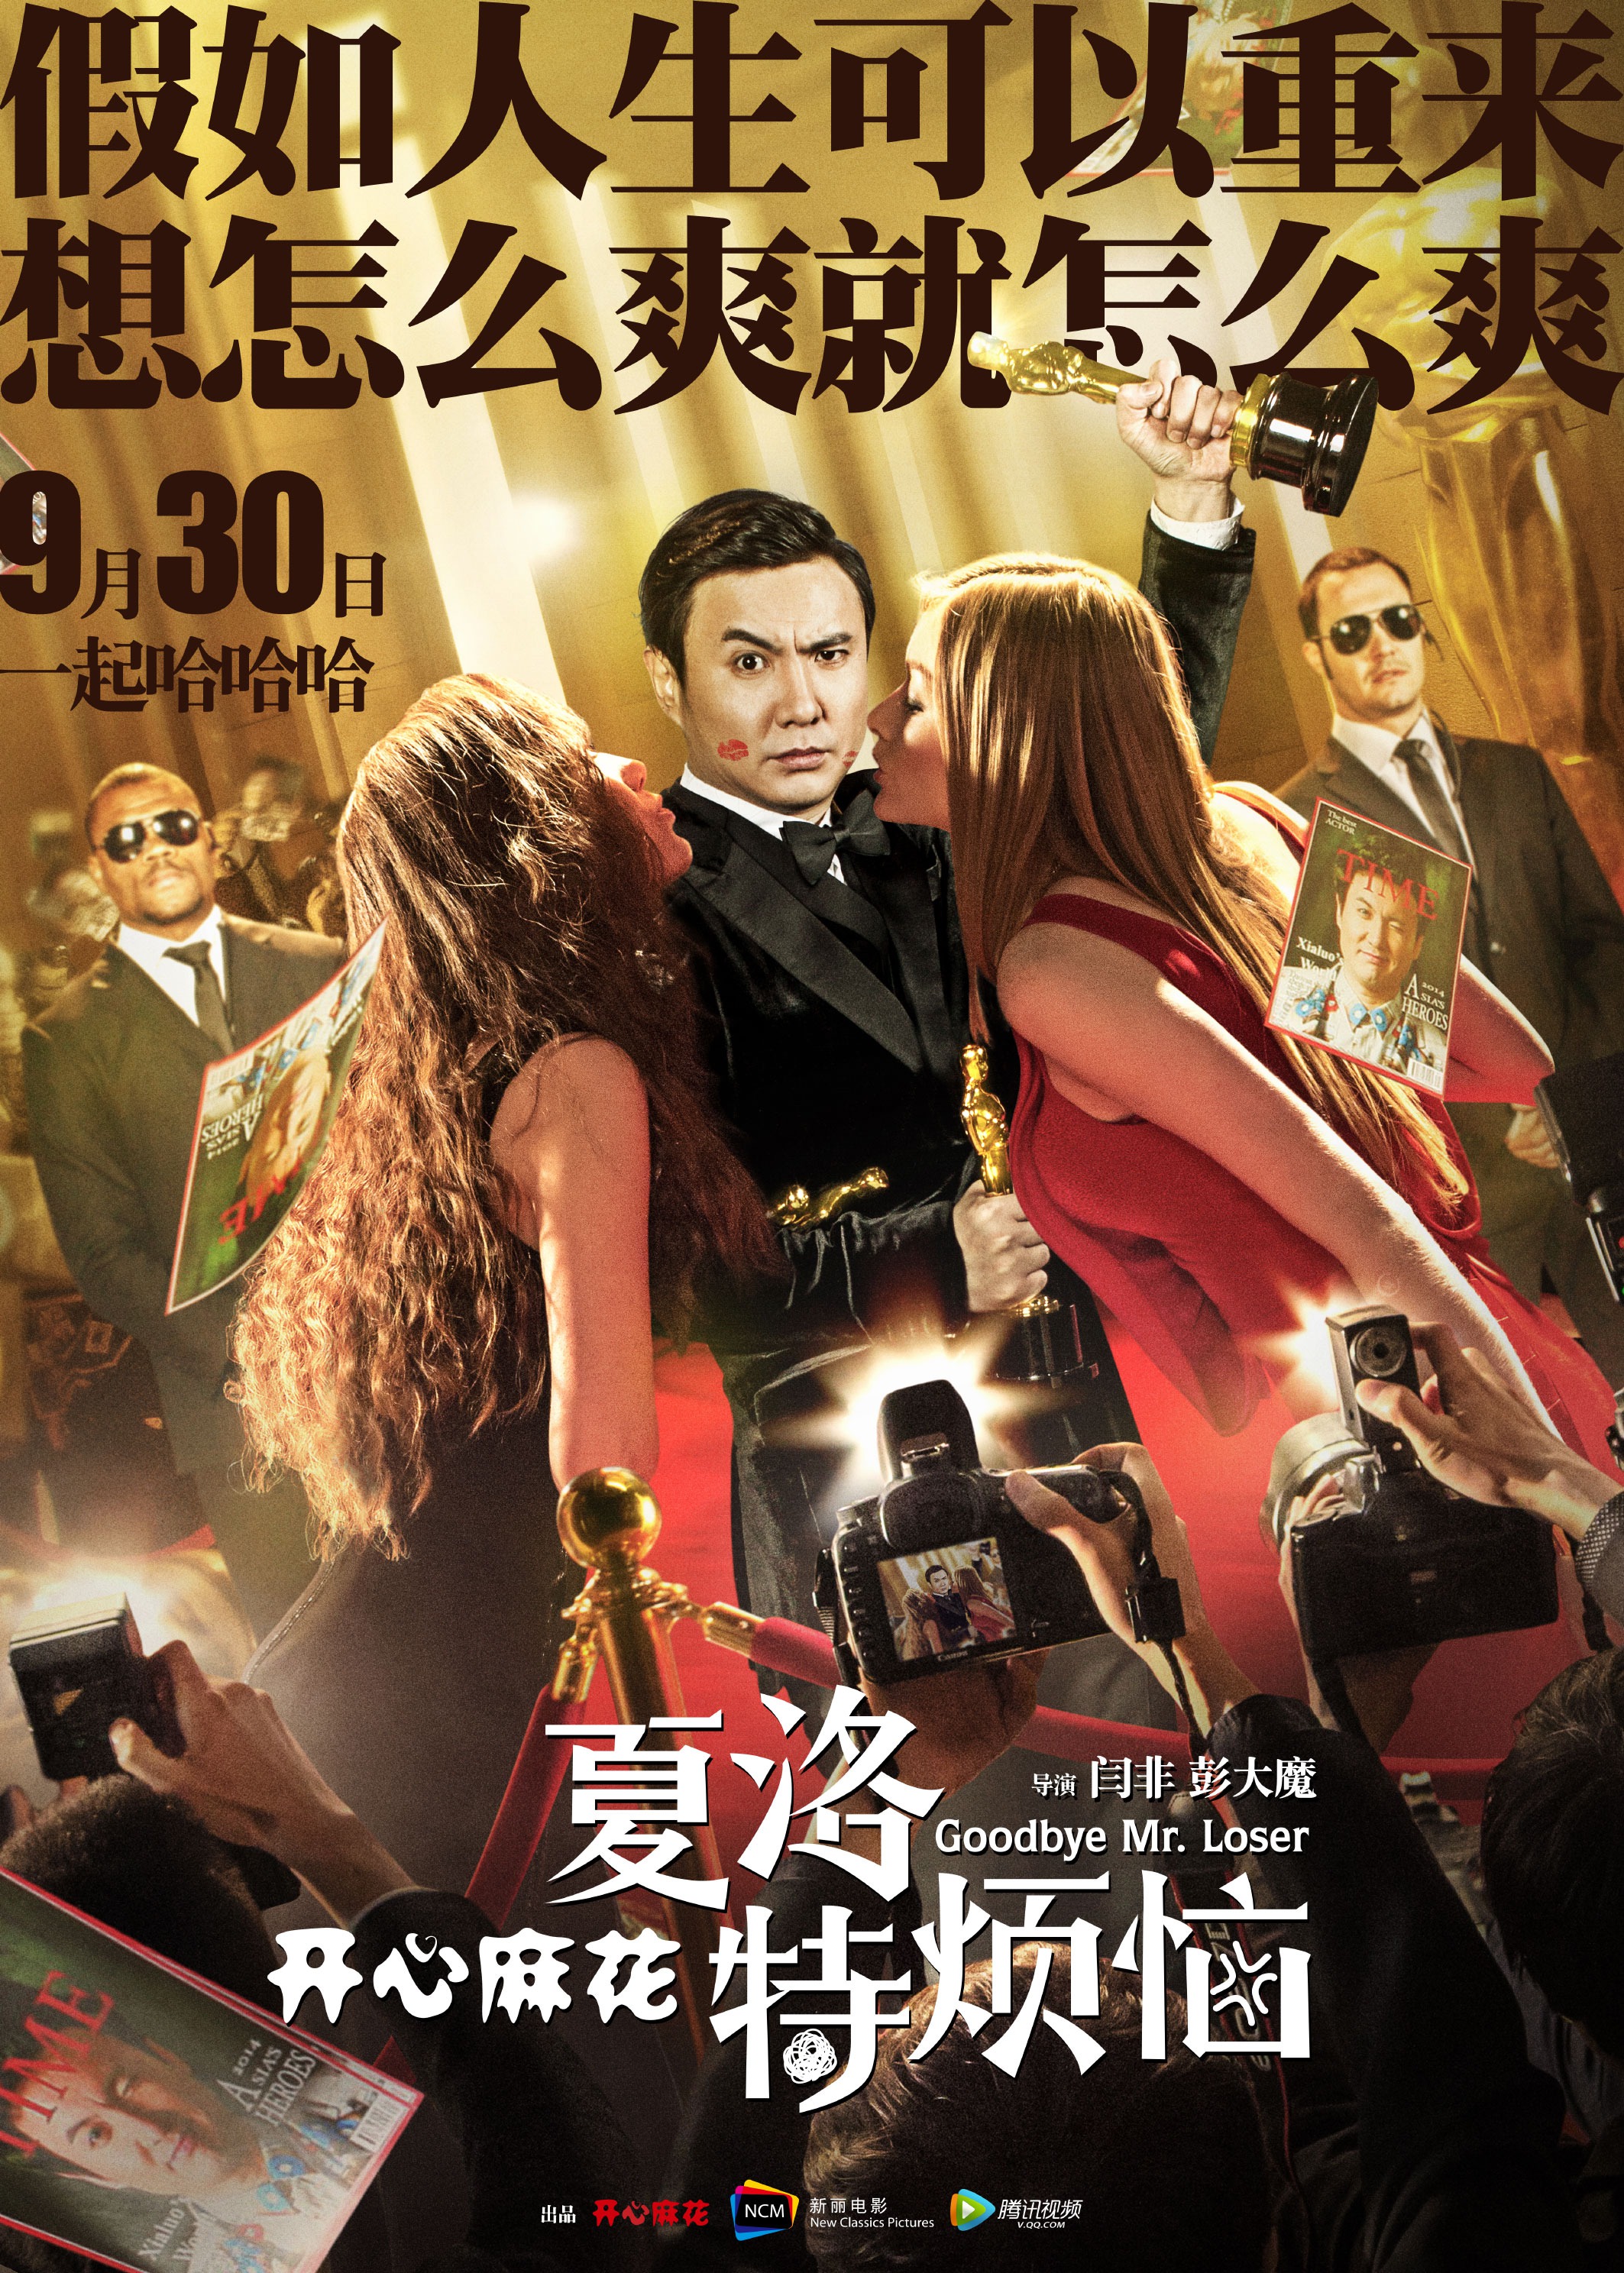 Mega Sized Movie Poster Image for Xia Luo te fan nao (#1 of 4)